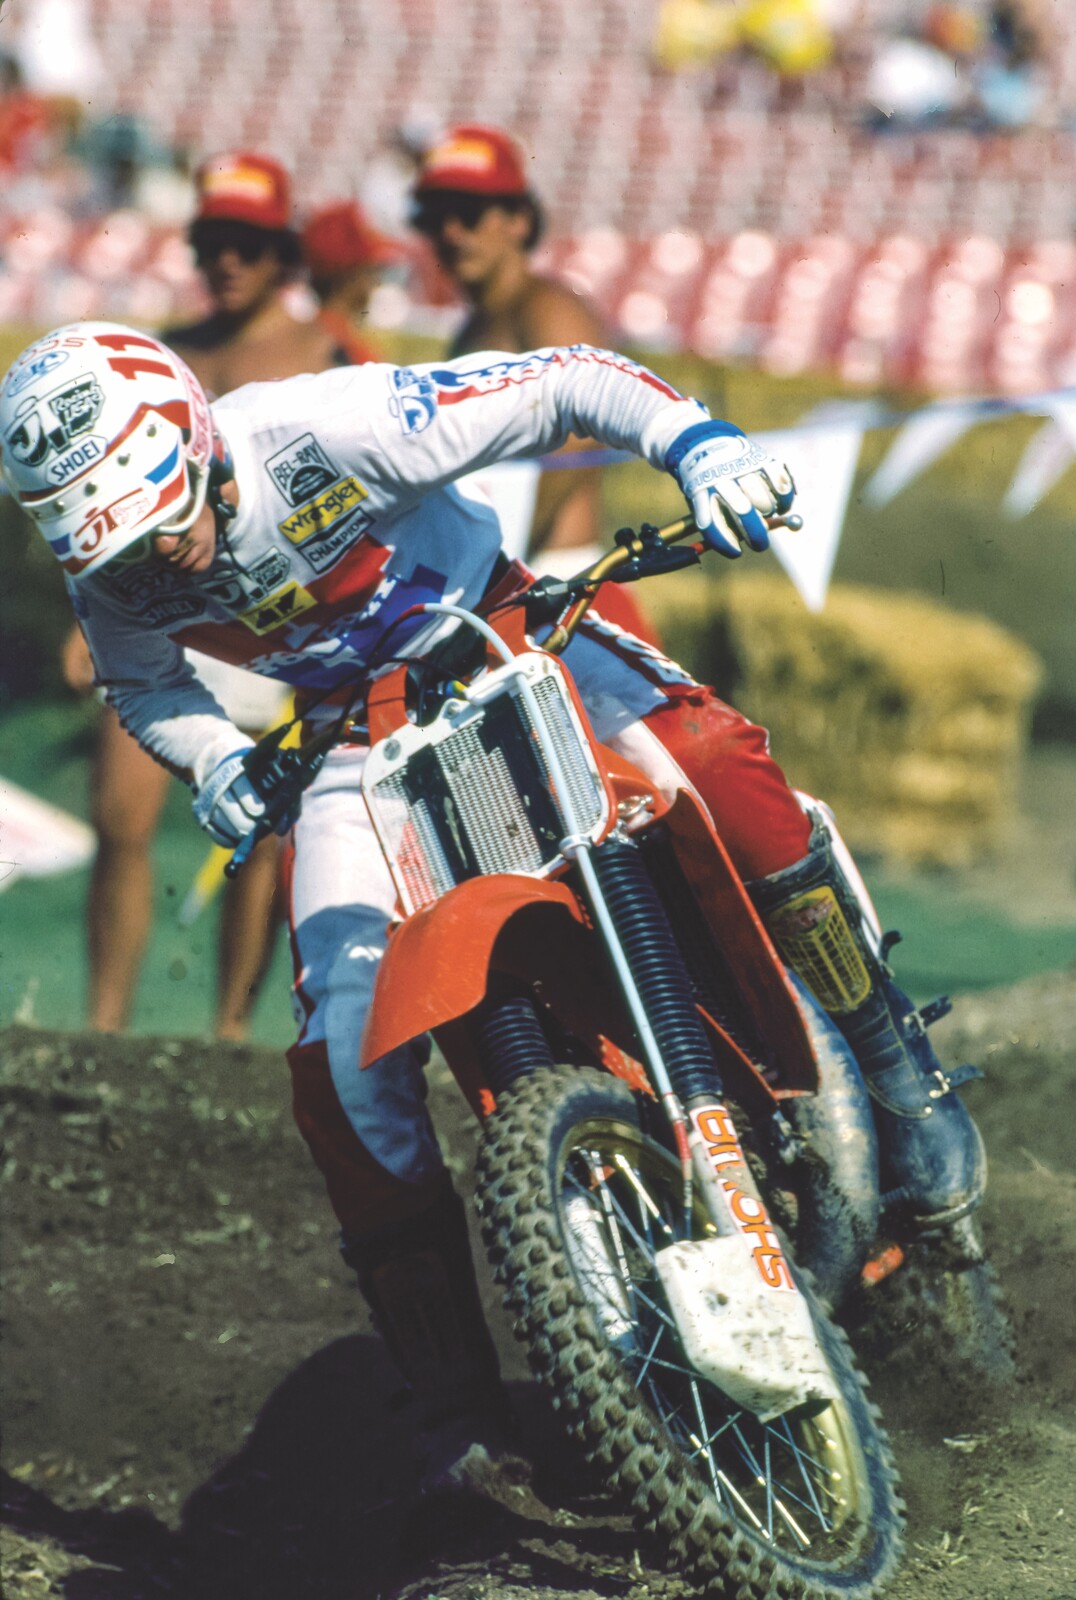 jason ciarletta was a 19-year-old professional supercross racer